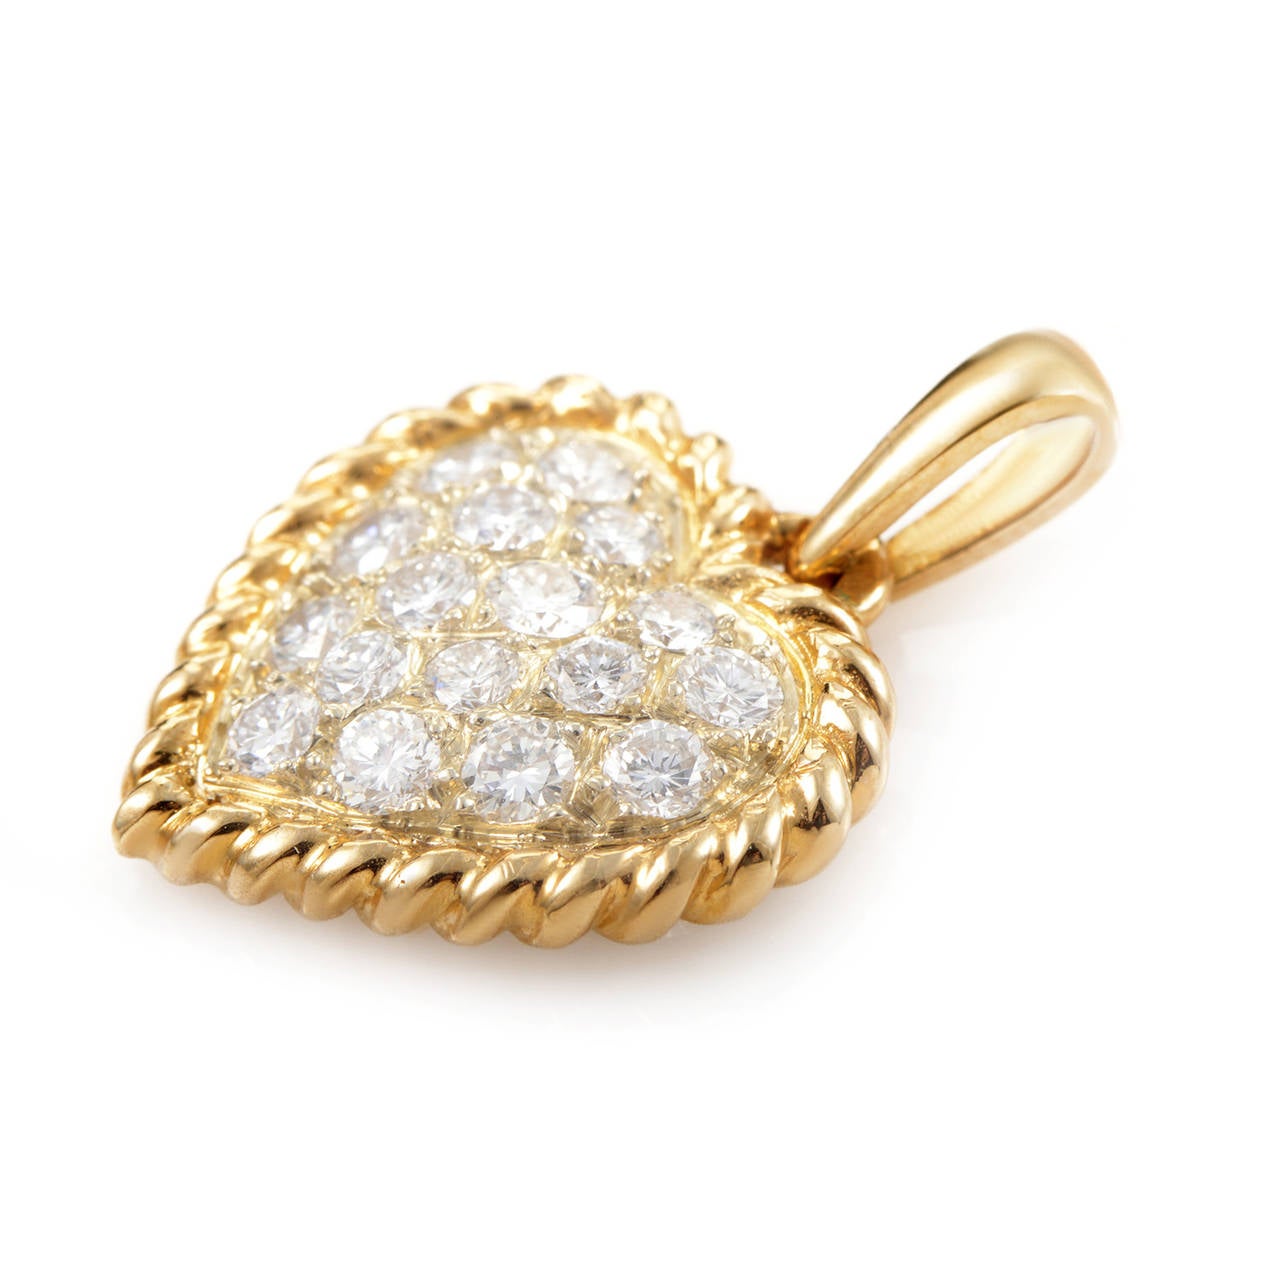 A pretty pave of diamonds is the hallmark of this elegant pendant from Van Cleef & Arpels. The heart-shaped pendant is made of 18K yellow gold and is set with an ~.75ct diamond pave.